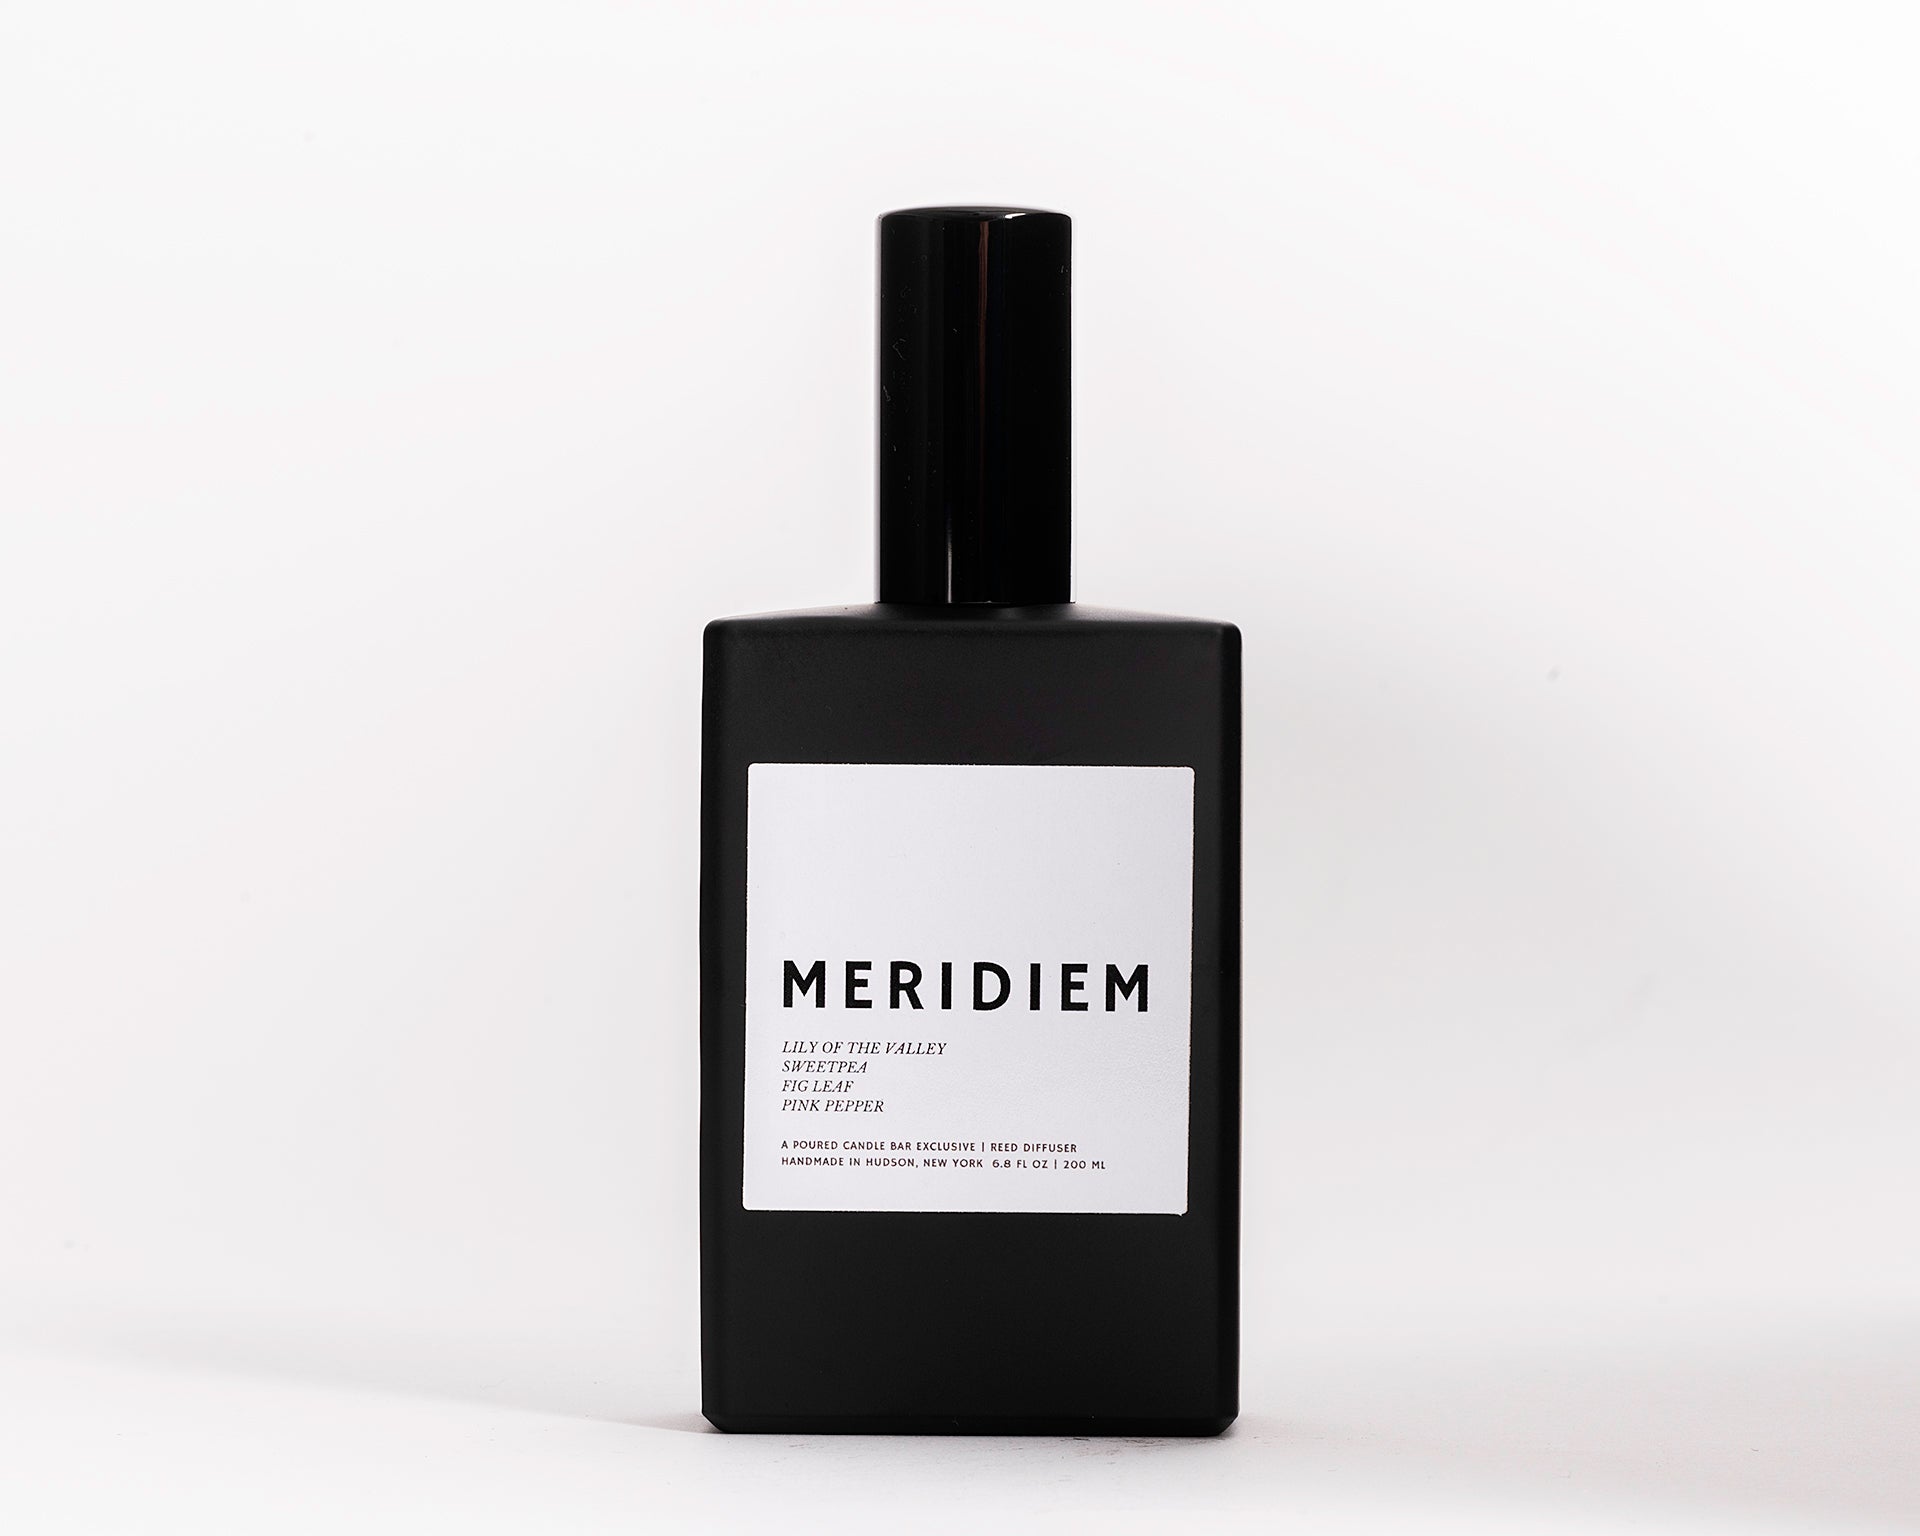 100 ml room spray in a black rectangular glass vessel. Profile Description: Green grass with sweet fruit + soft spice  Notes: Aldehydes, Lilly of the Valley, Grass, Sweet Pea, Fig Leaf, Pink Peppercorn